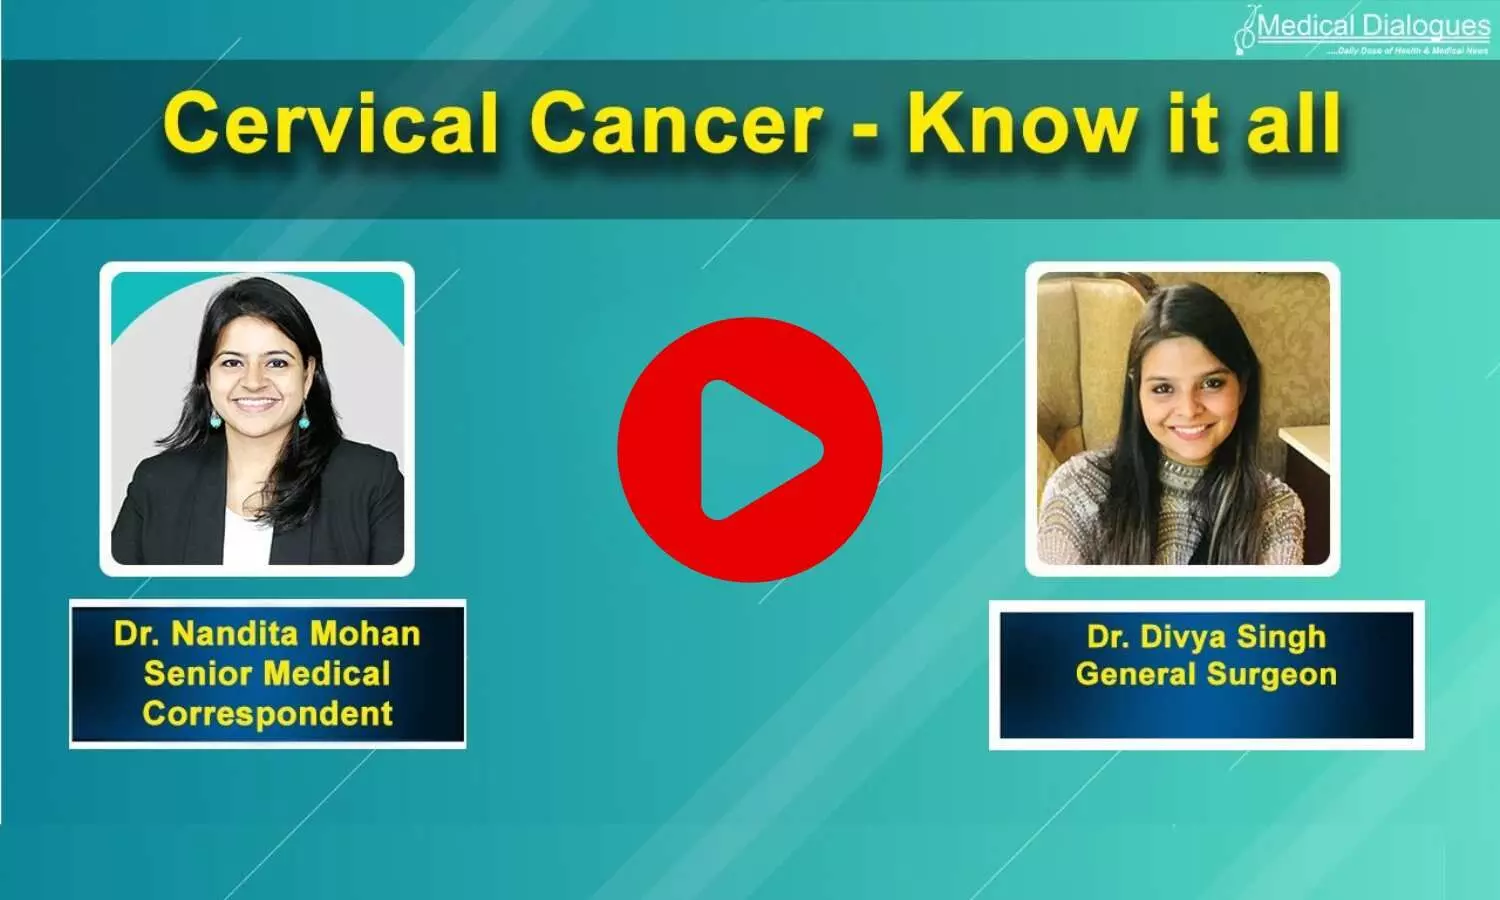 Know all about Cervical Cancer from Dr. Divya Singh